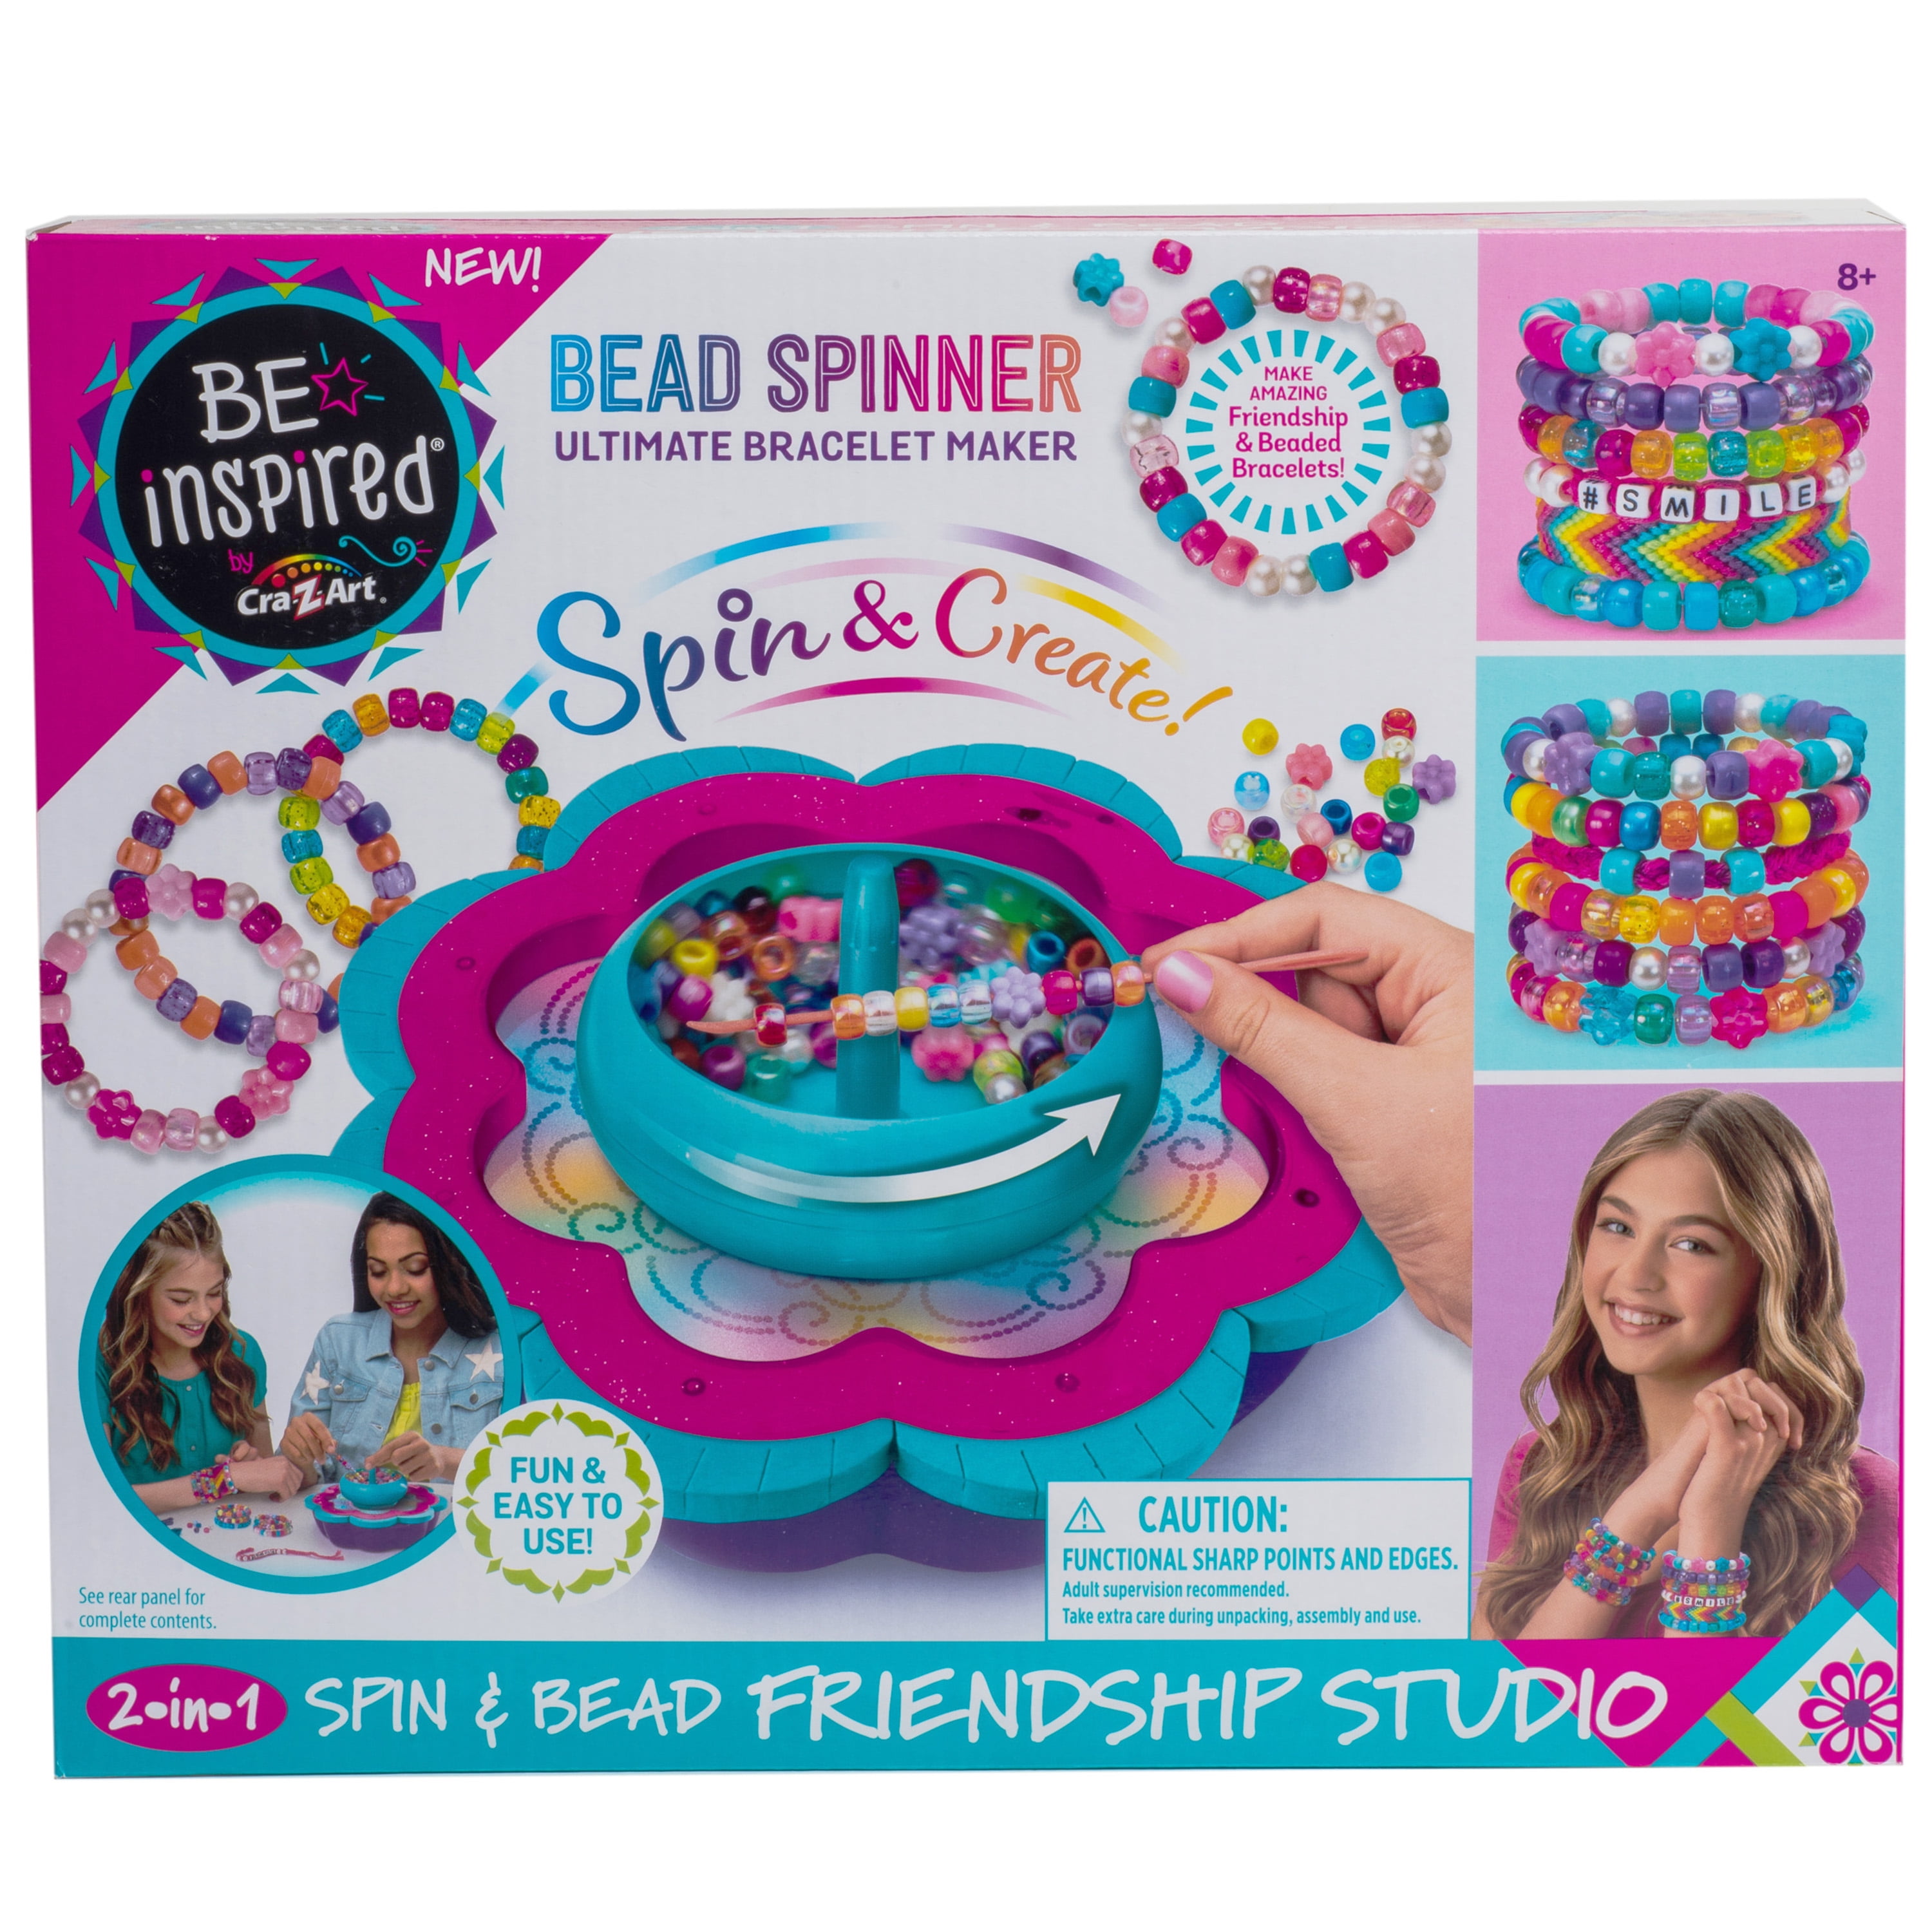 Cra-Z-Art Be Inspired Spin & Bead Friendship Bracelet Unisex Studio, Child Ages 8 and up